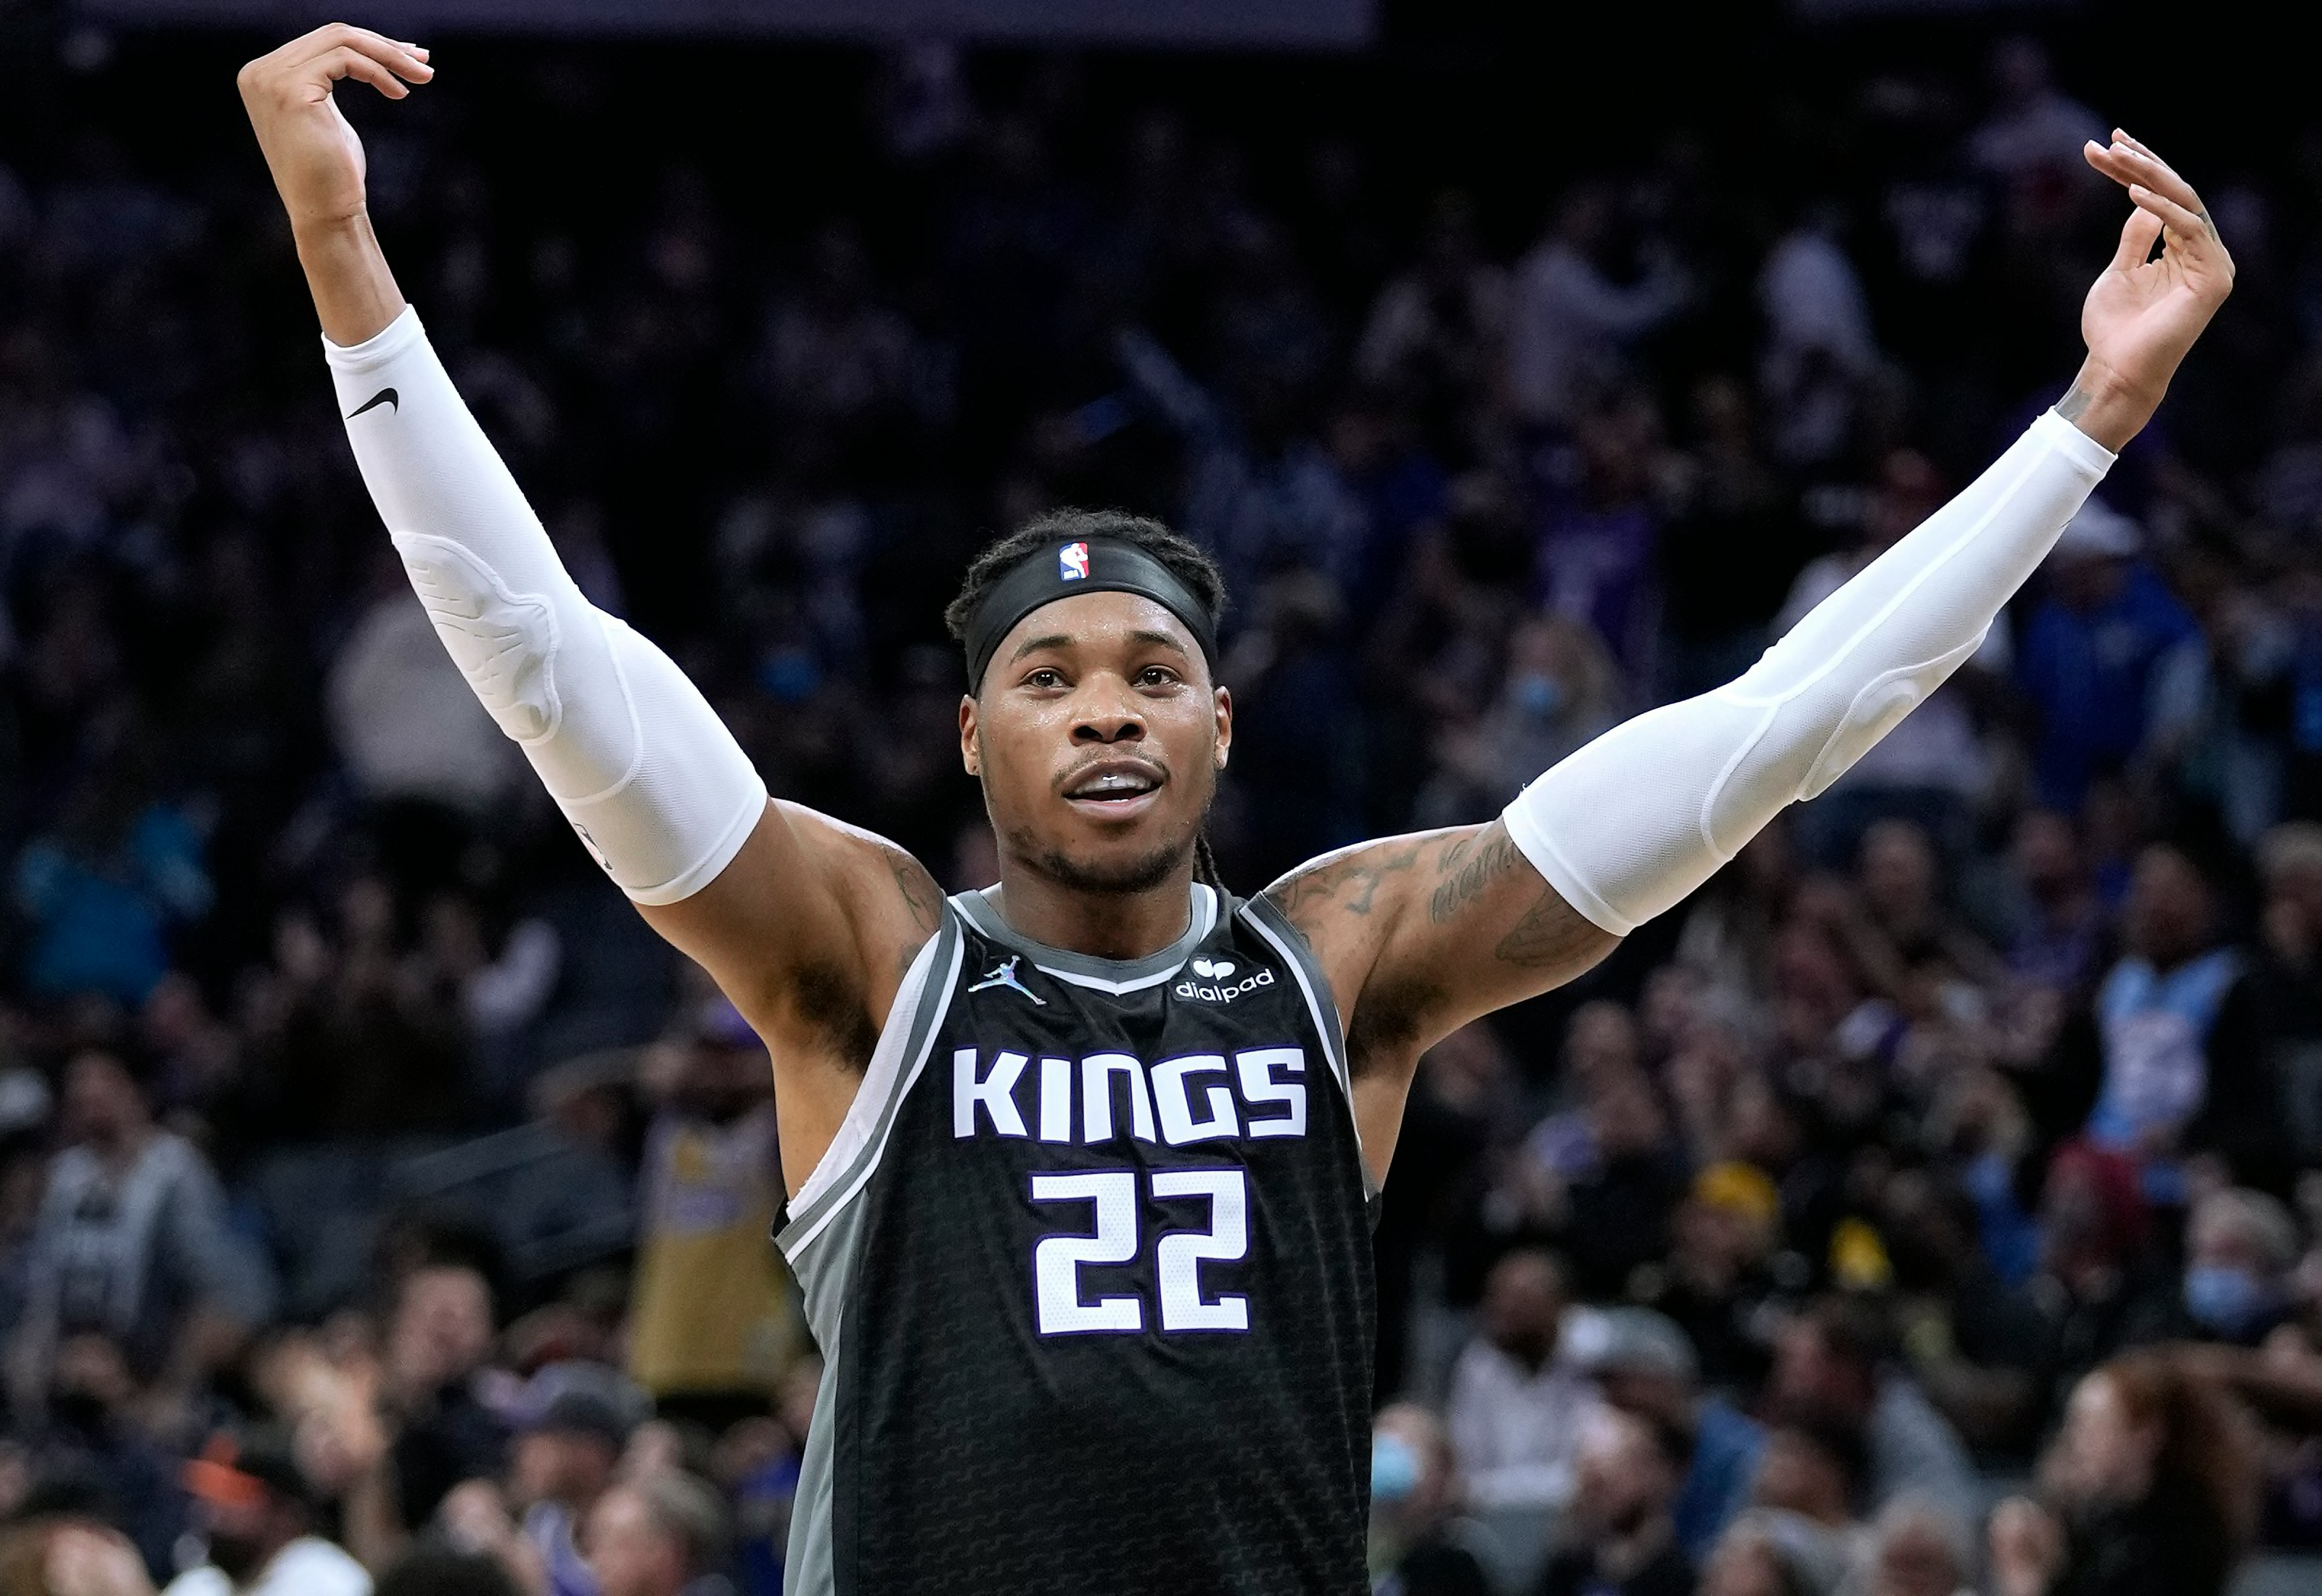 Top 3 Sacramento Kings players off to a hot start this season